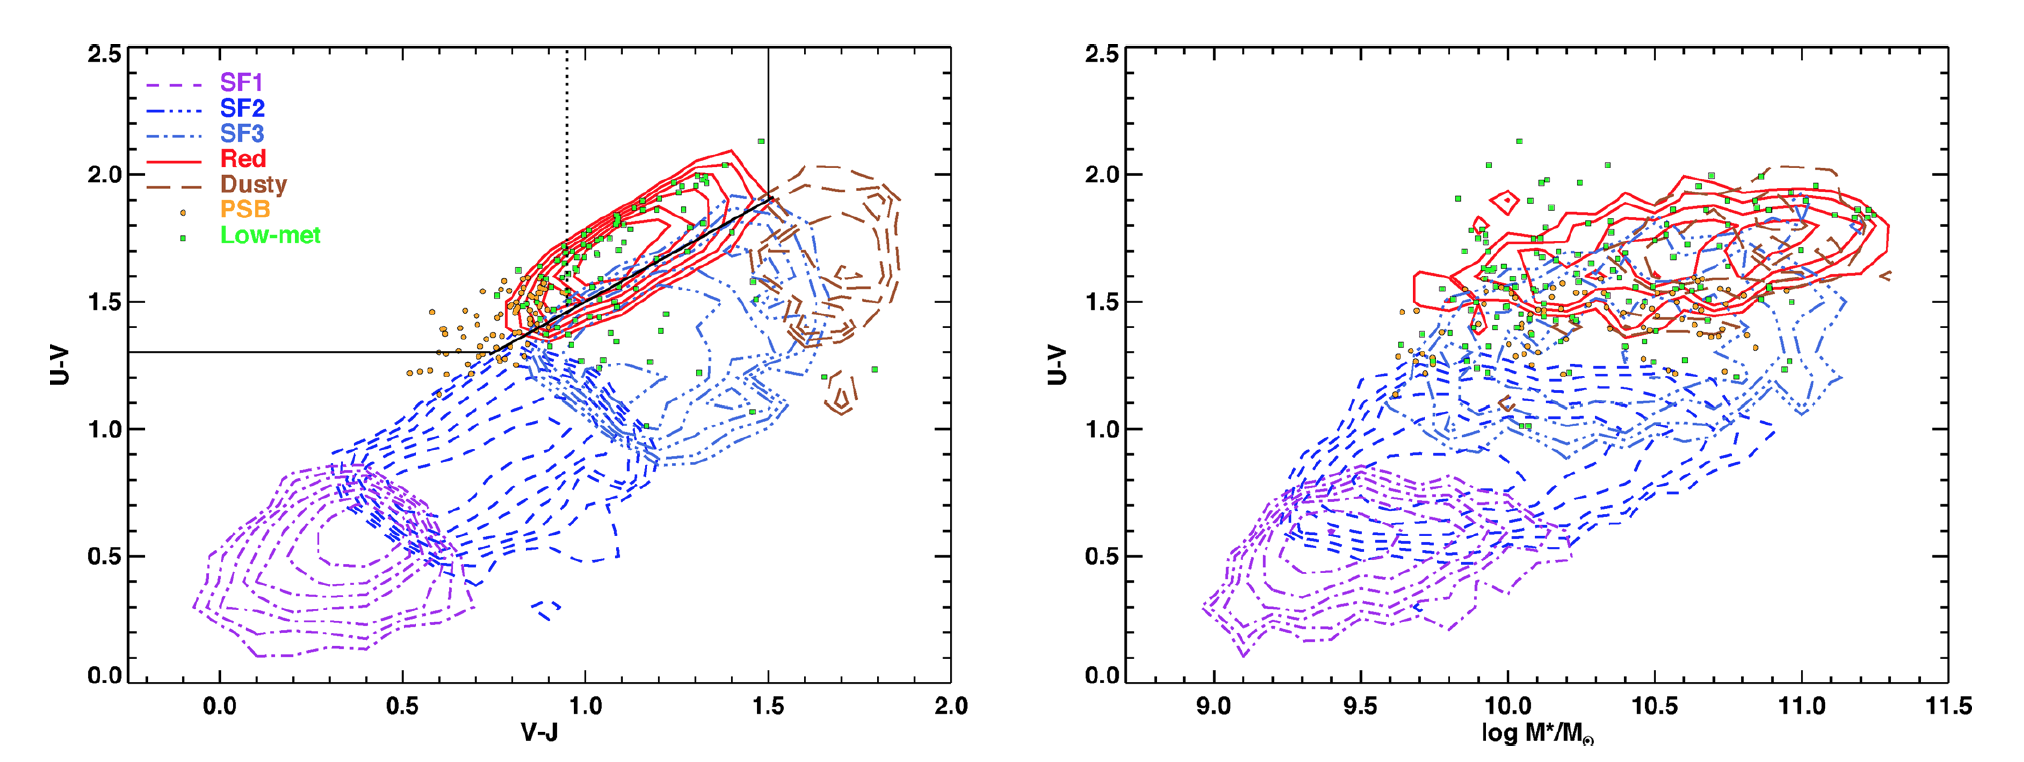 The K-corrected rest-frame UVJ colour–colour diagram (left) and colour–stellar mass diagram (right) of the UDS galaxies with 0.9 < z < 1.2. Contours show the loci of the primary classes as determined from their super-colours, symbols show where galaxies belonging to the two rarer classes lie. Black lines in the left-hand panel indicate the standard demarcation lines between red-sequence, blue-sequence and dusty star-forming galaxies. The dotted black line shows the cut used by Whitaker et al. (2012) to separate post-starburst galaxies from red-sequence galaxies.